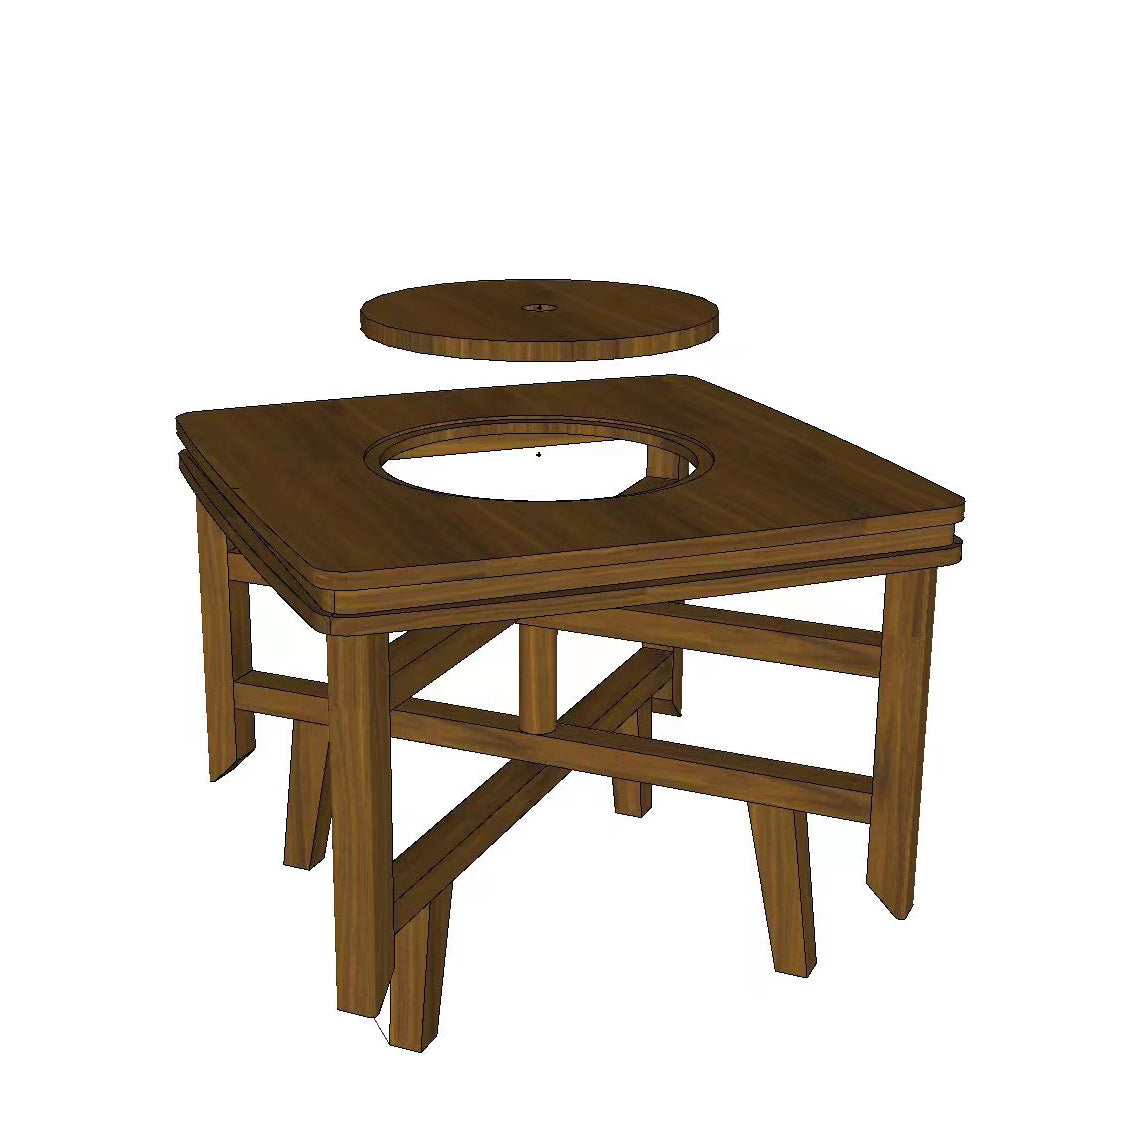 Solid Wood Coffee Table 31.5"L X 31.5"W X 52.5"H Outdoor Table